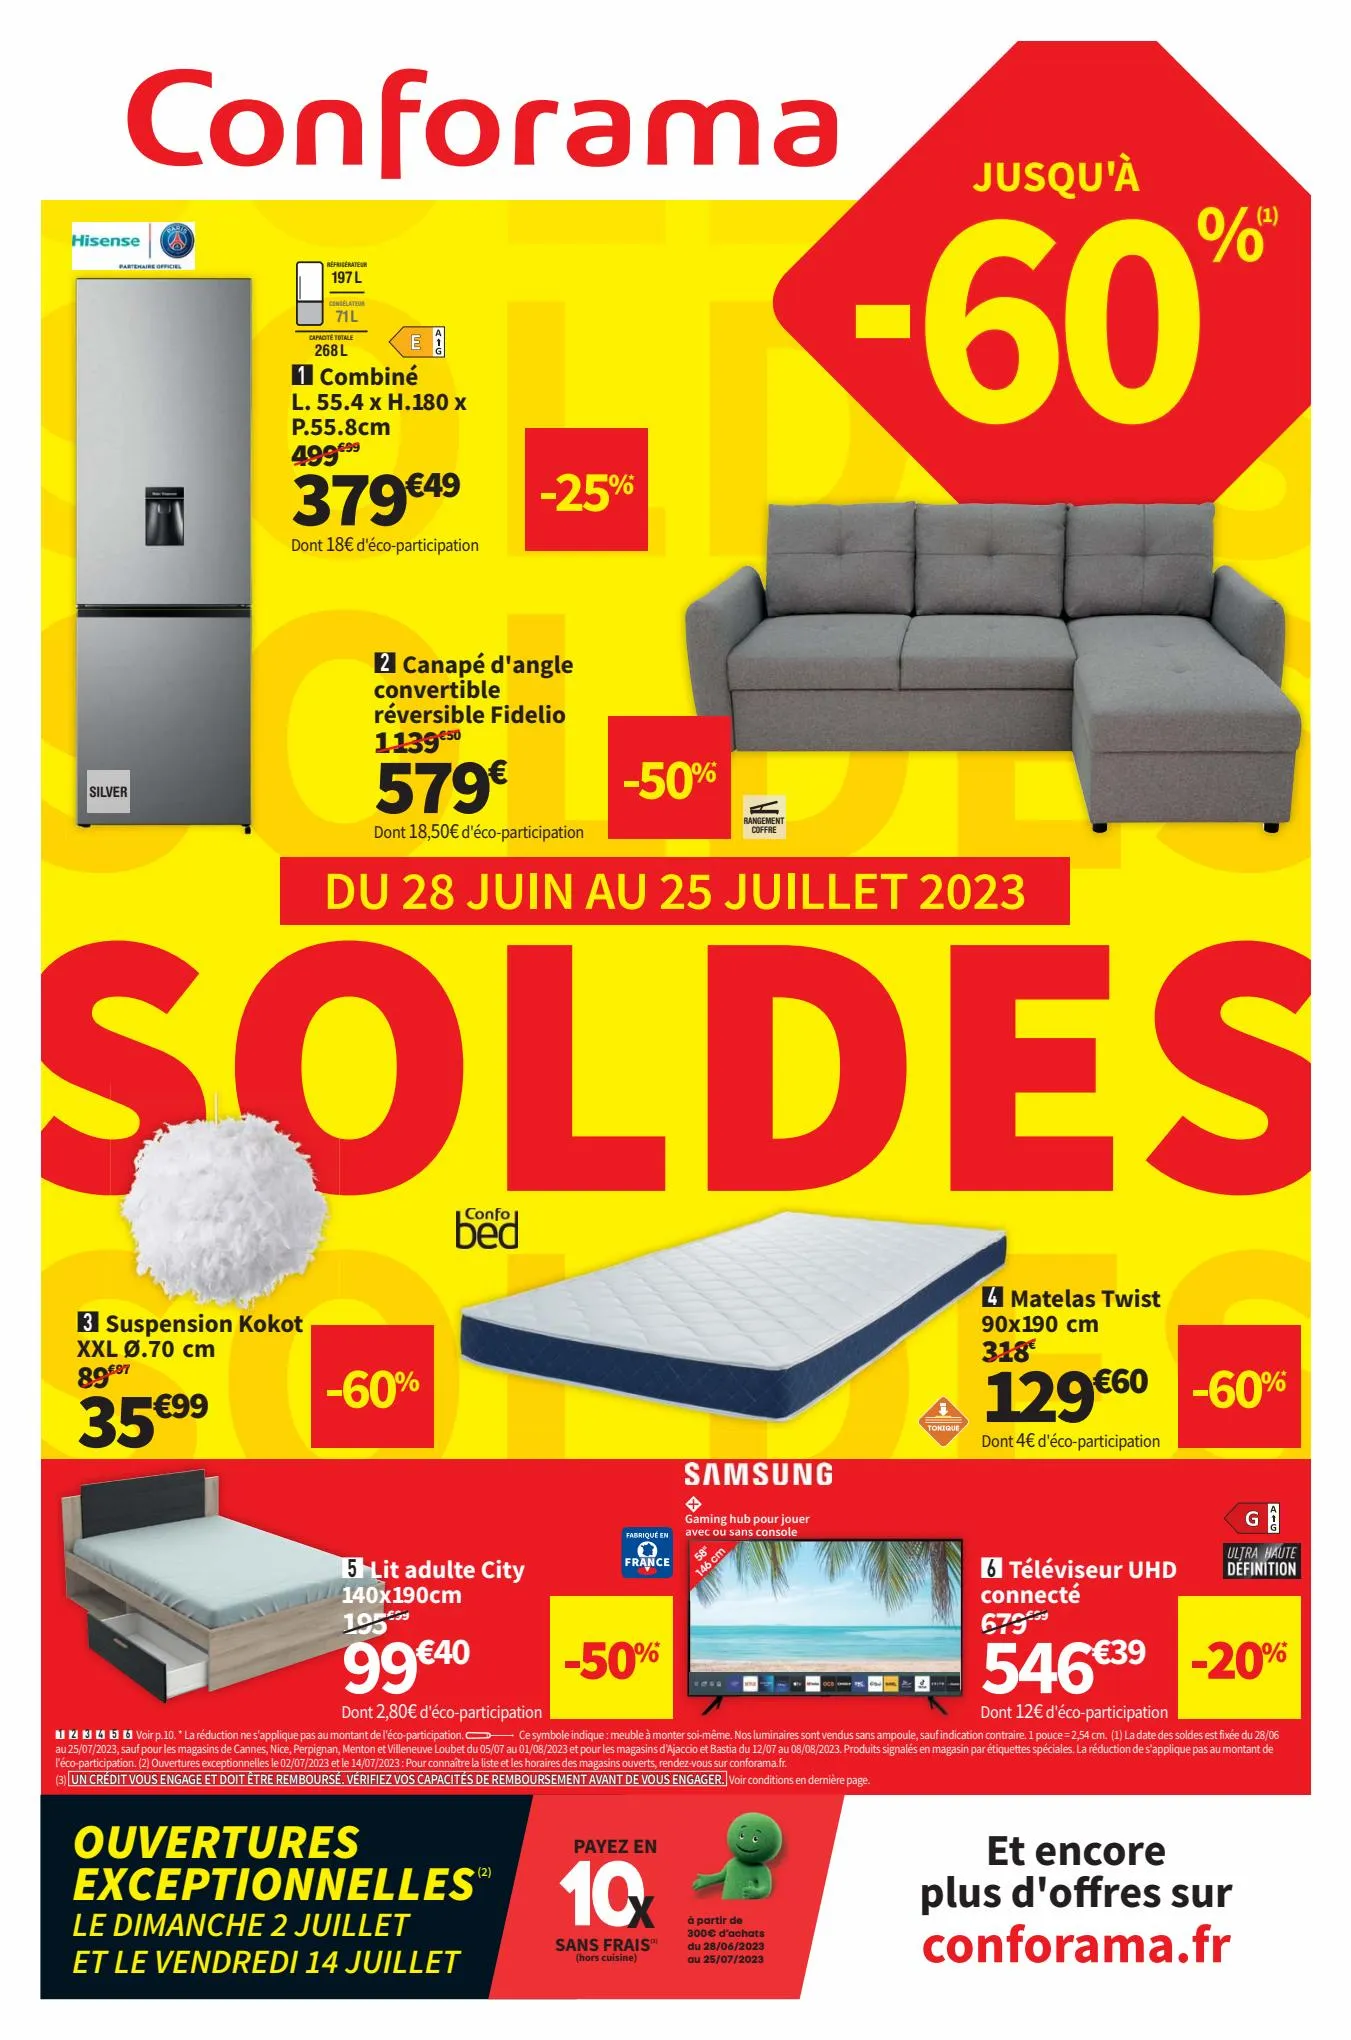 Catalogue Soldes, page 00001